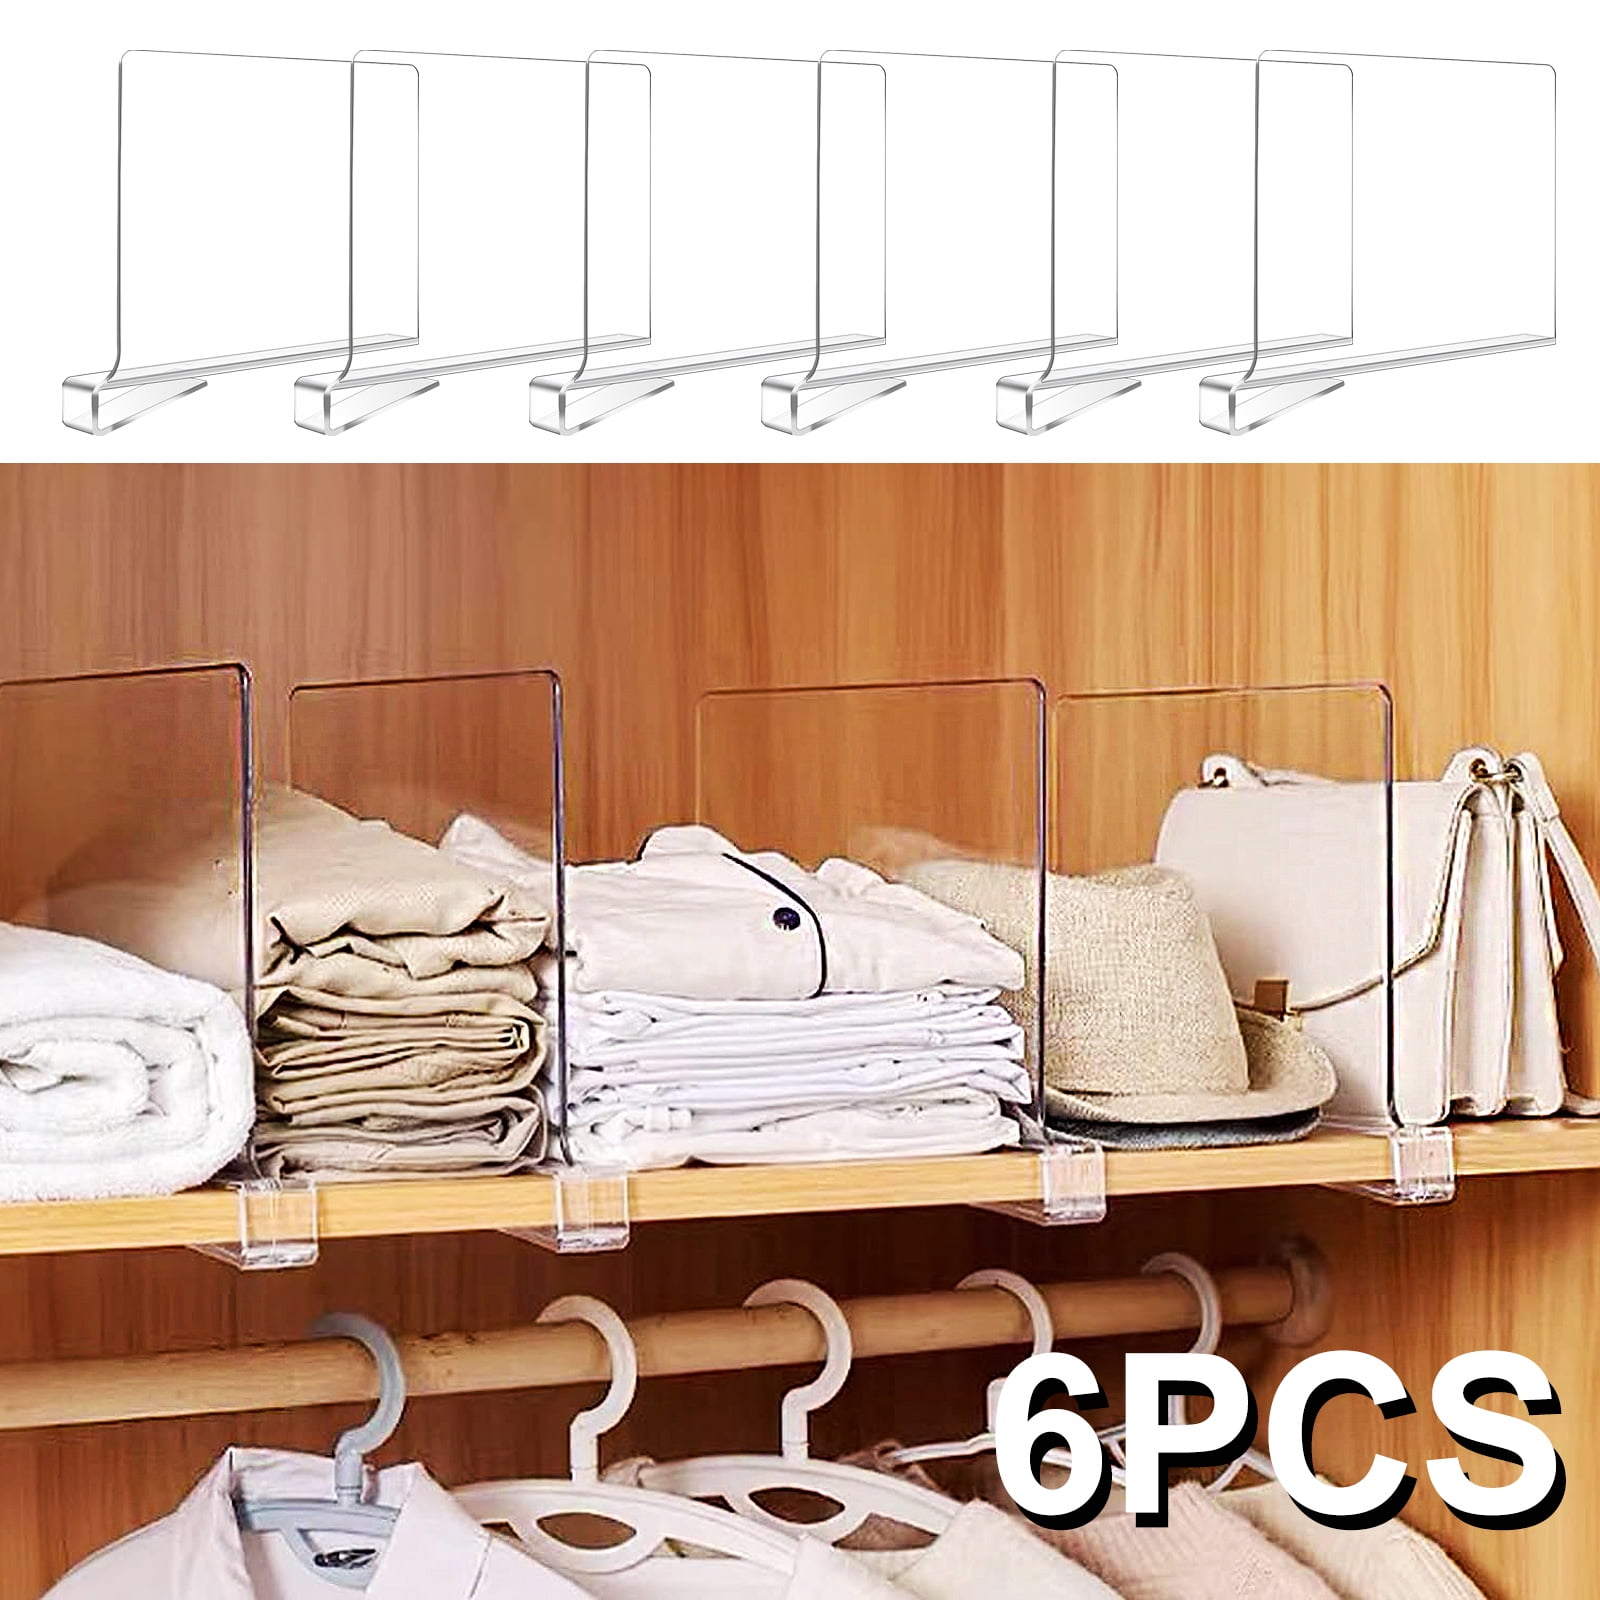 Sorbus Acrylic Adhesive Shelf Divider Organizers, w/Self Adhesive Tape,  Great for Closet Organization, Clothes, Linens, Purse Separators, Kitchen  Cabinets, Bedroom, 2-Pack, Clear (11x1x8) 